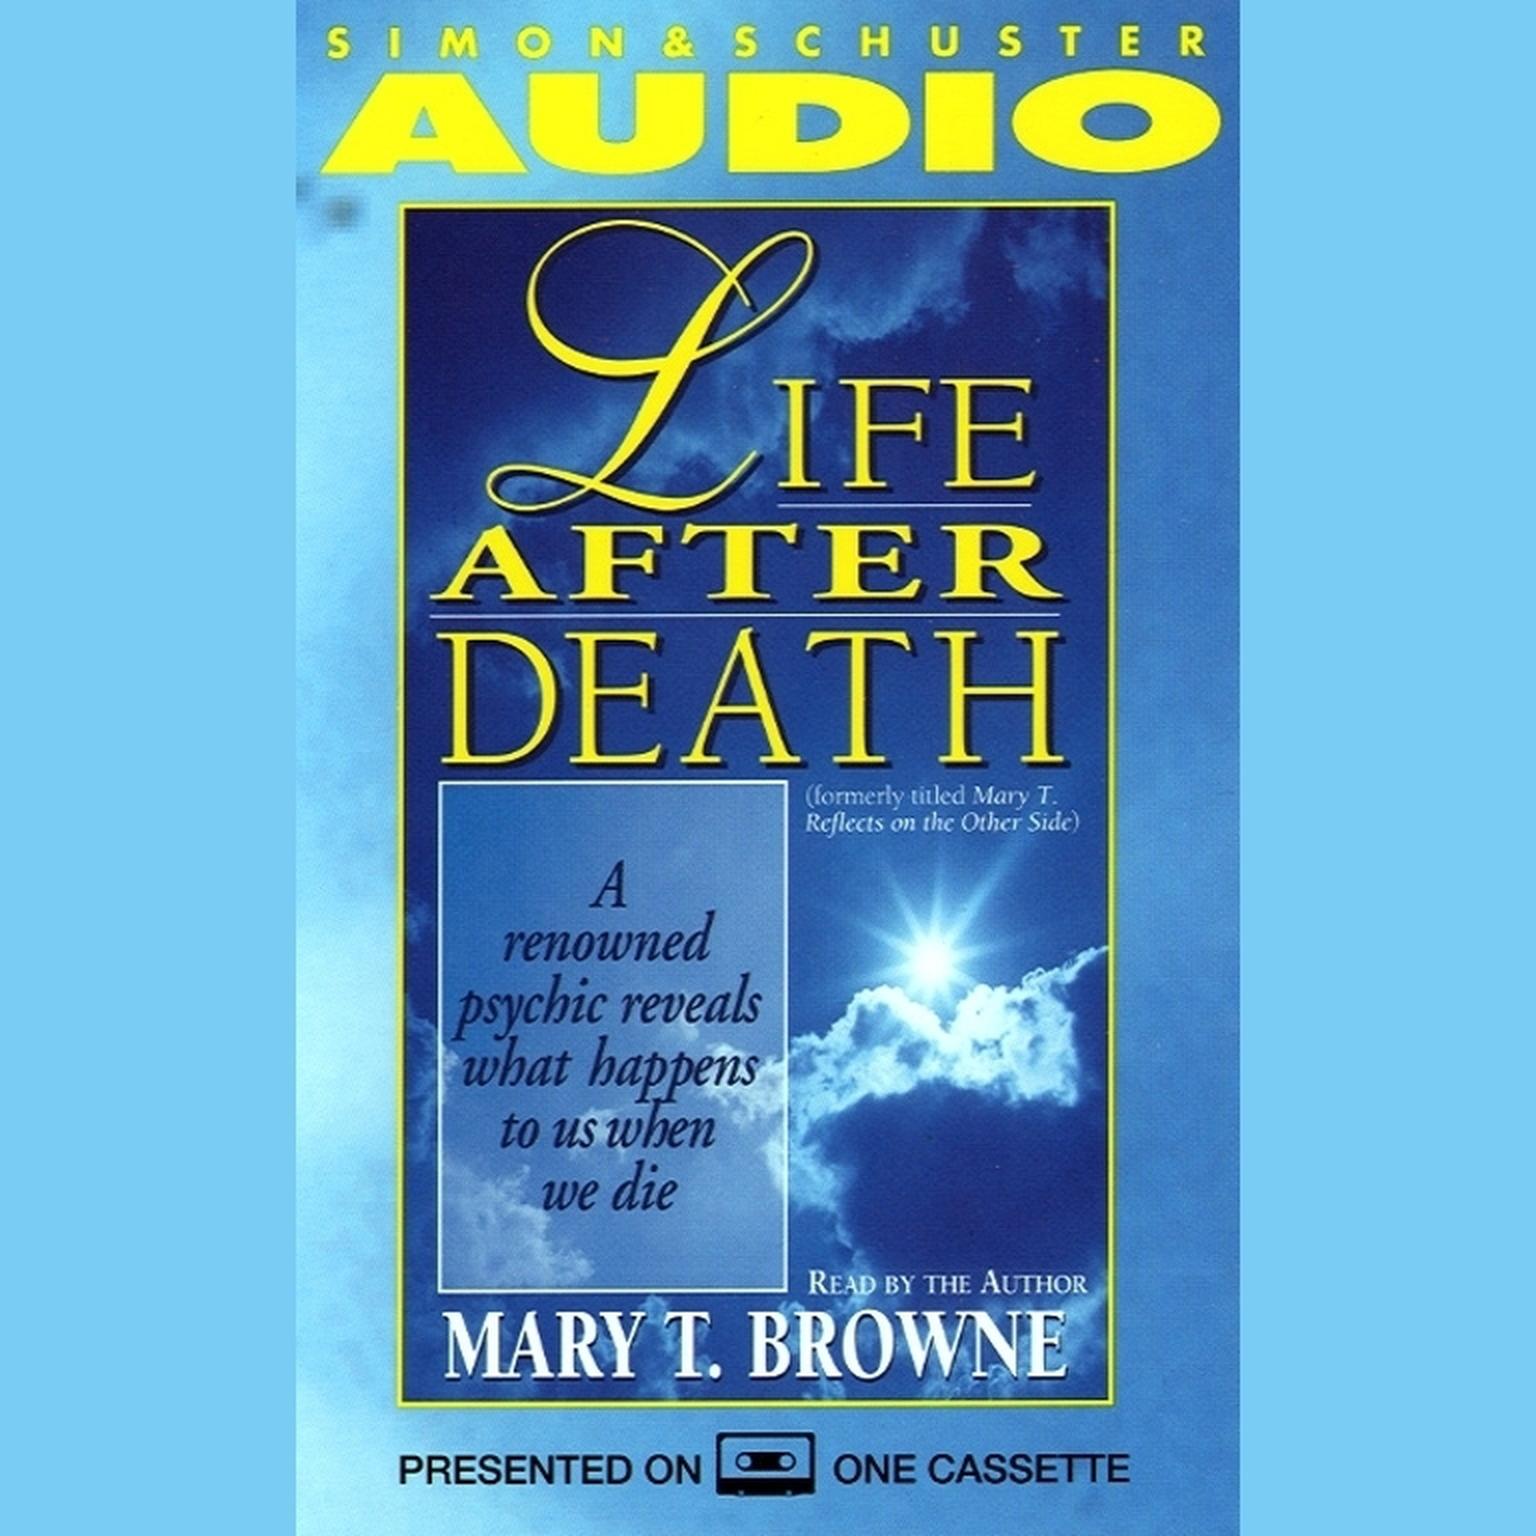 Life After Death (Abridged): A Renowned Psychic Reveals What Happens to Us When We Die Audiobook, by Mary T. Browne